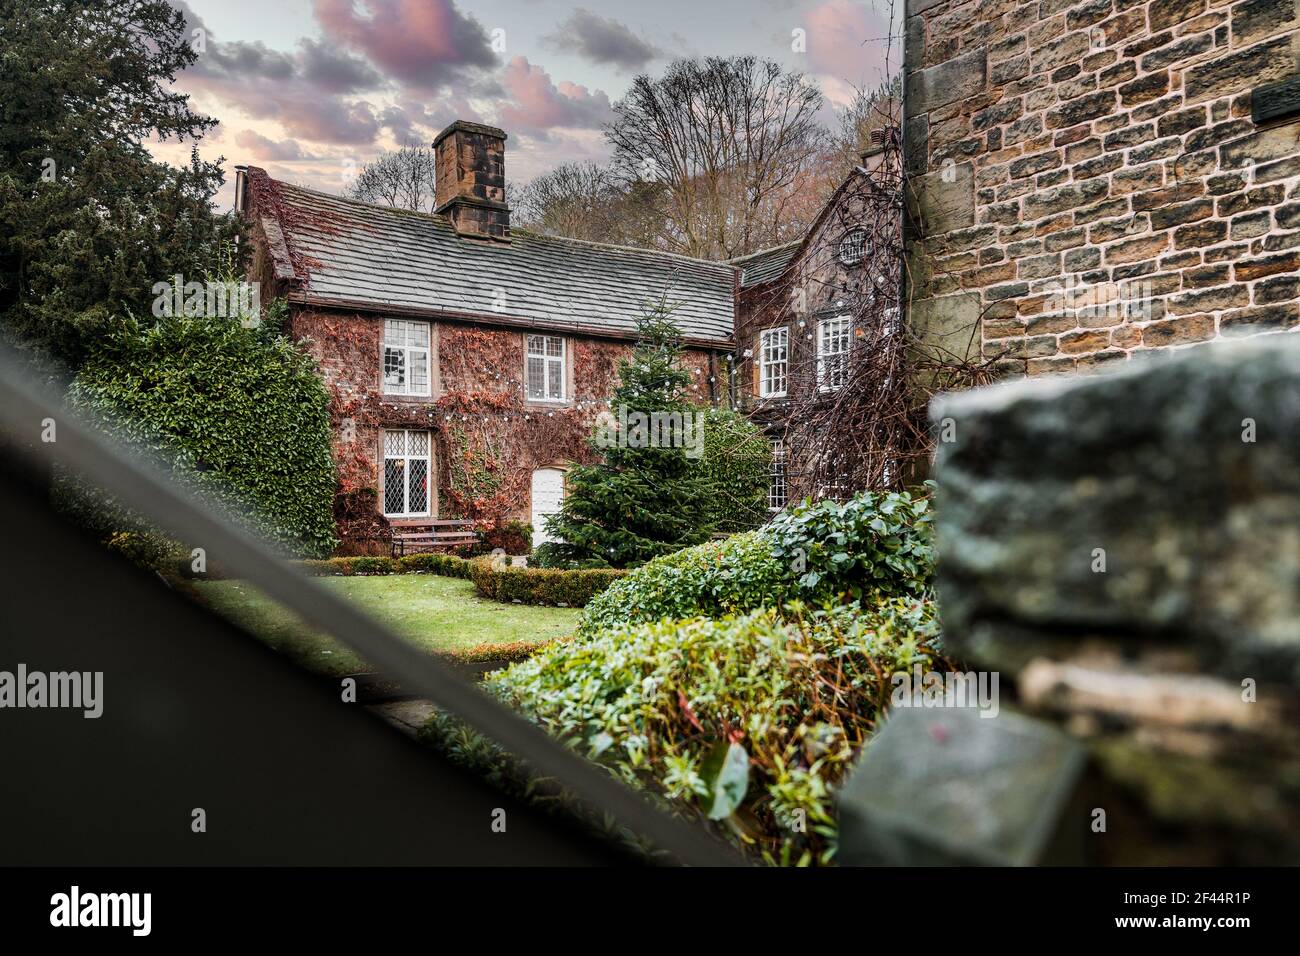 Whitley Hall Sheffield old stone cottage accommodation with Christmas tree and lights in romantic winter garden courtyard Stock Photo